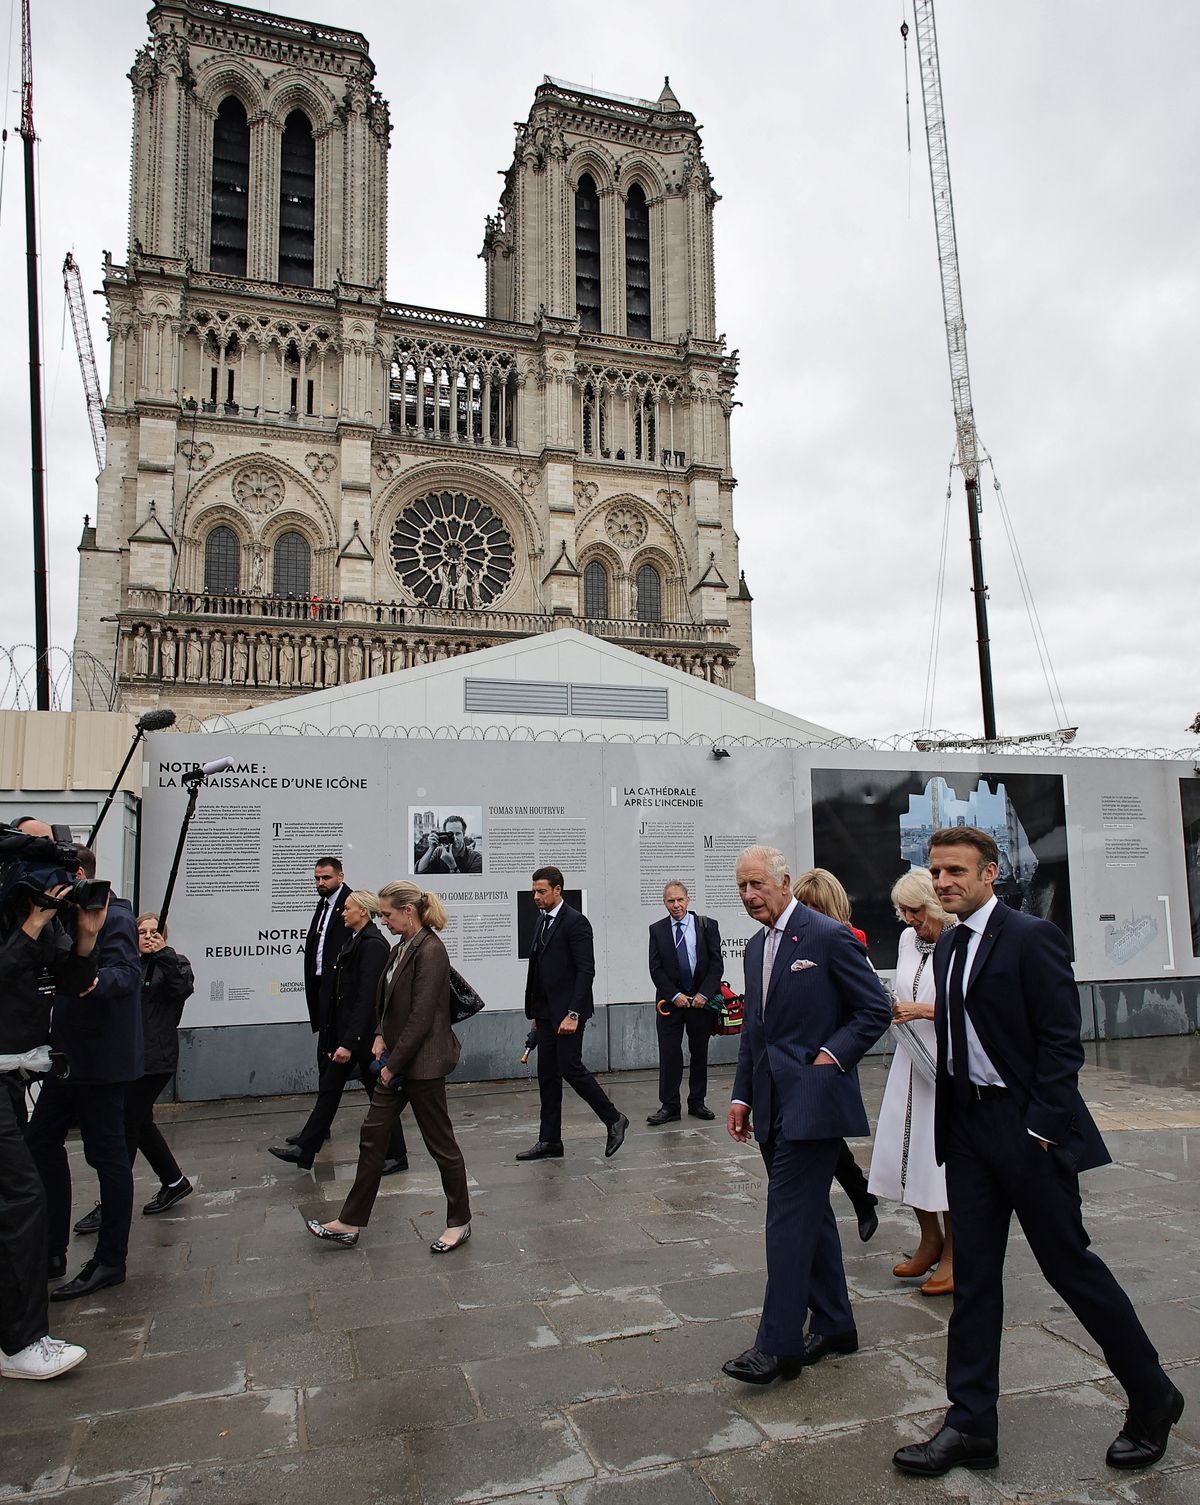 Notre Dame Cathedral update – the resurrection of an icon